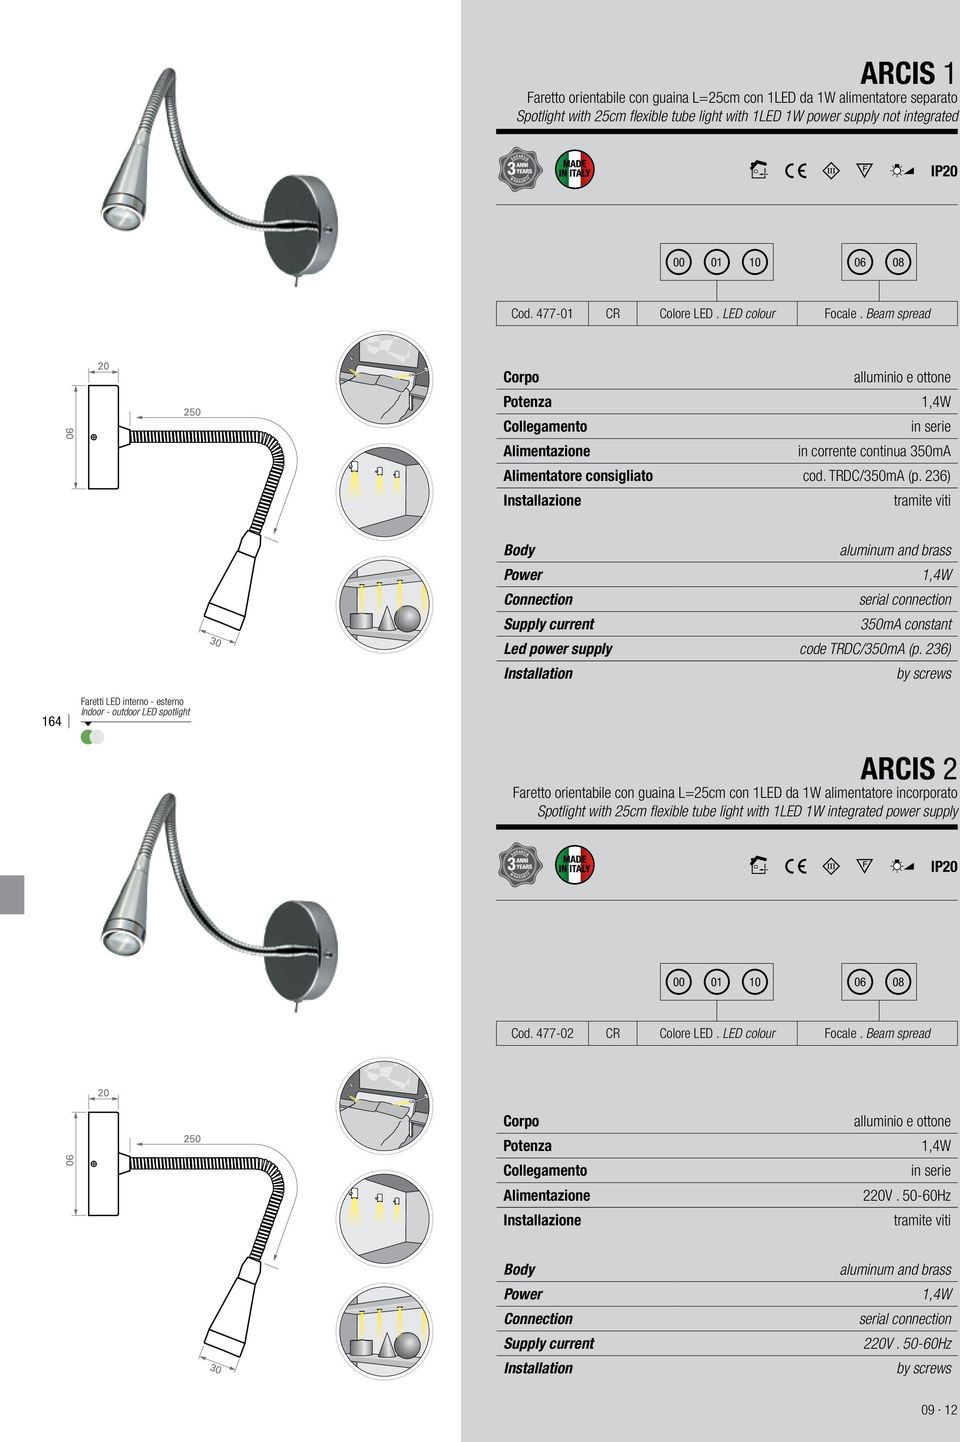 TRDC/350mA (p. 236) Installazione tramite viti 30 Body aluminum and brass Power 1,4W Connection serial connection Supply current 350mA constant Led power supply code TRDC/350mA (p.